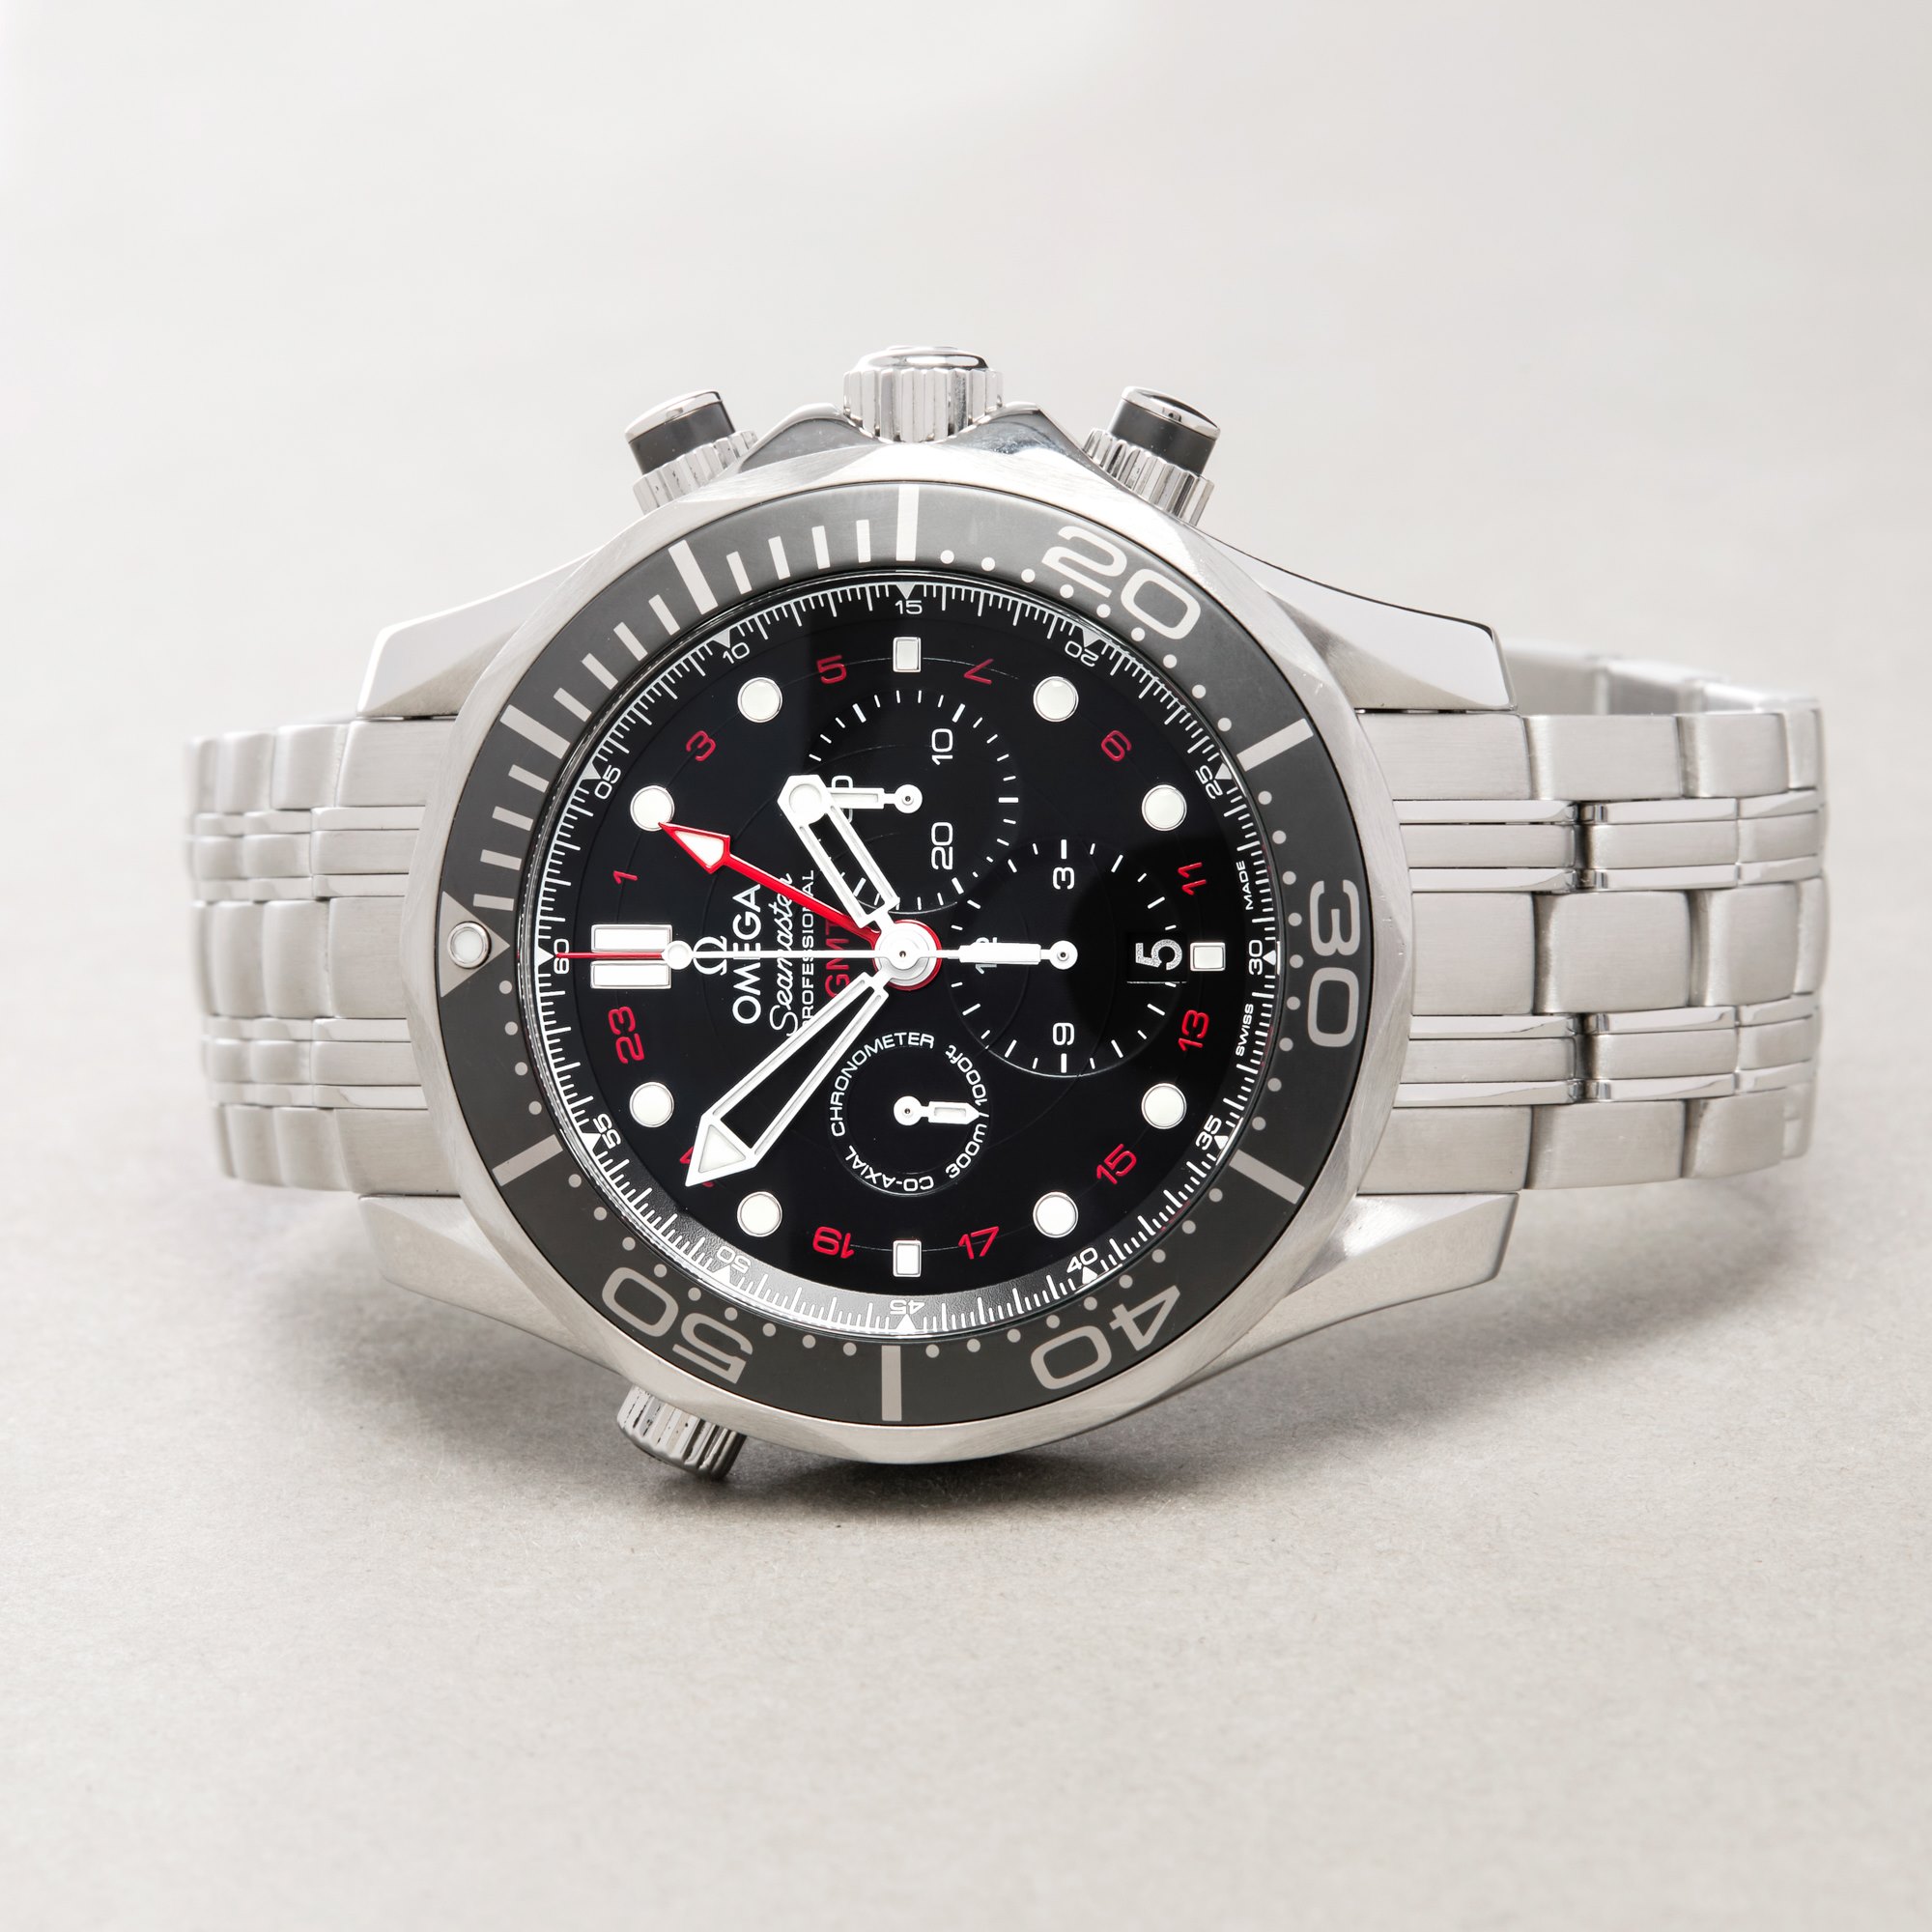 Omega Seamaster GMT Chronograph Stainless Steel 212.30.44.52.01.001